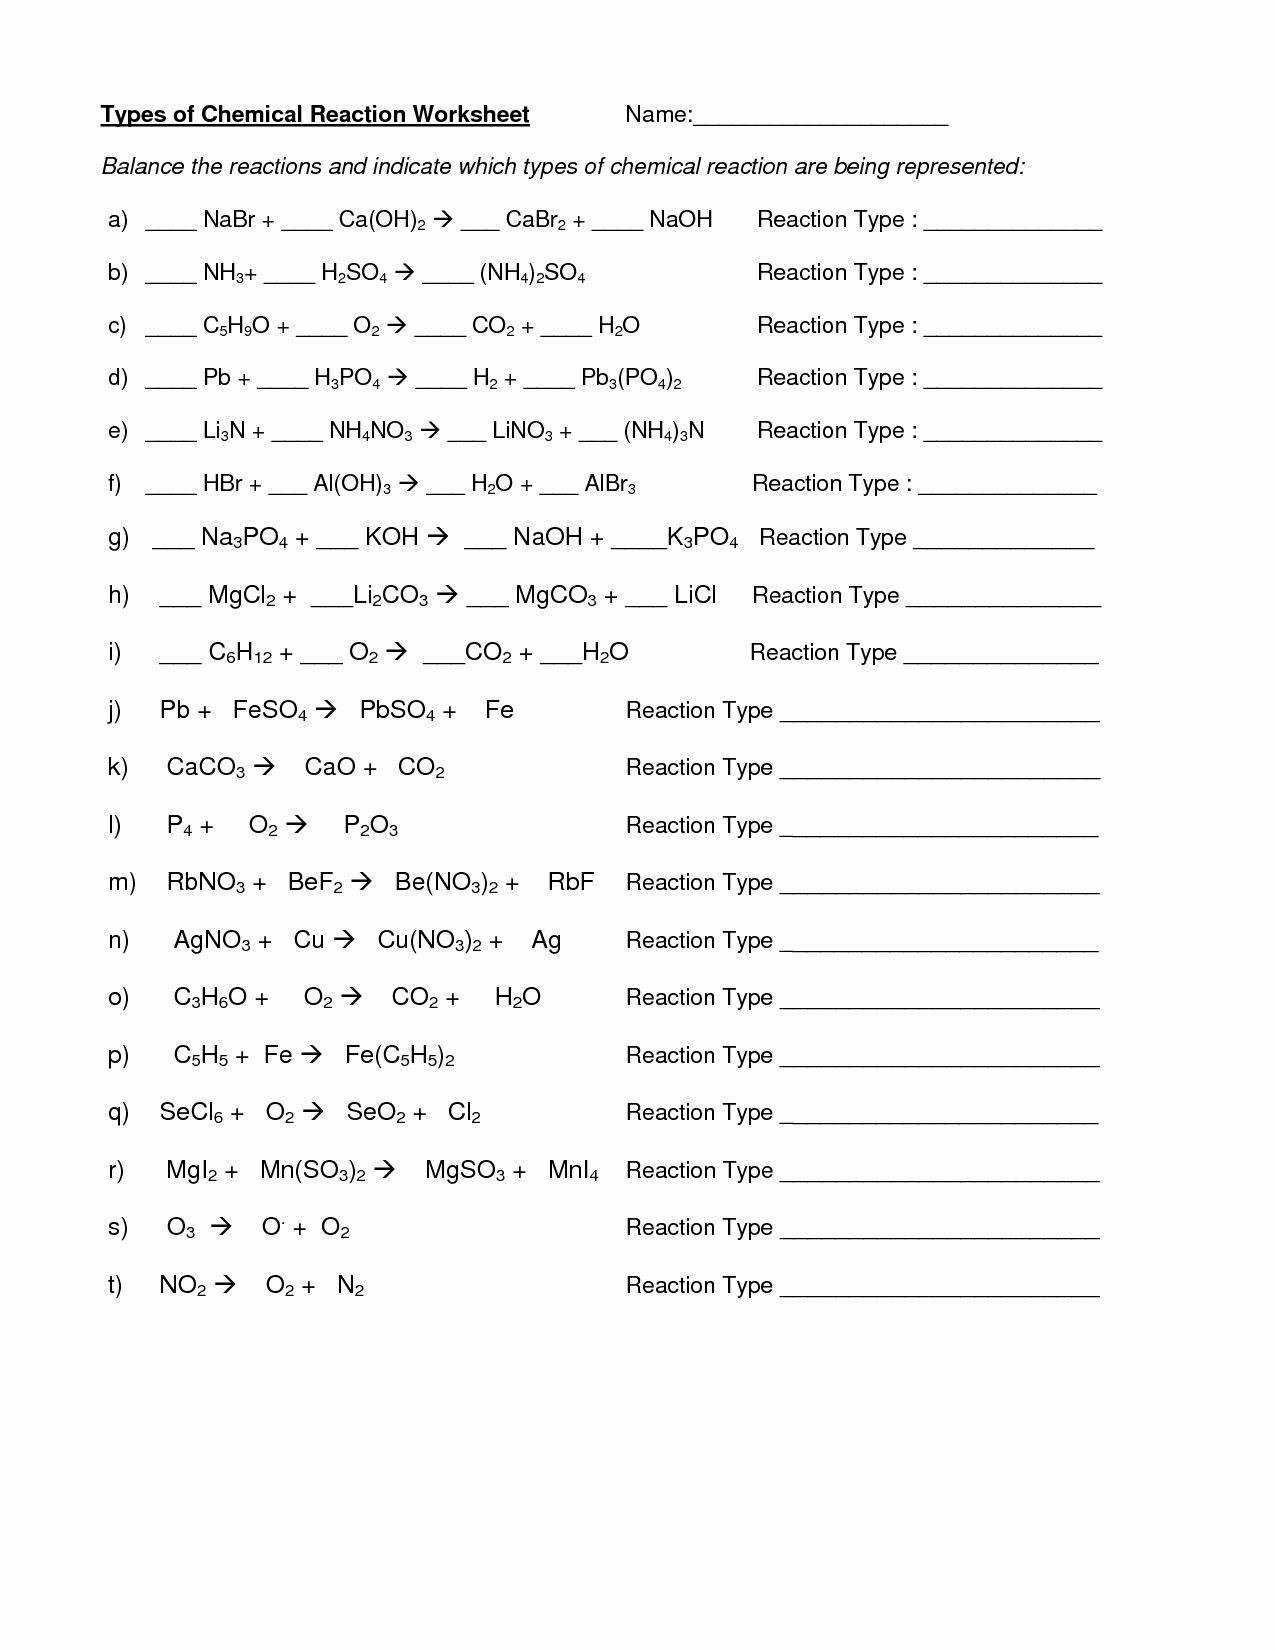 Classification Of Chemical Reactions Worksheet 50 Classifying Chemical Reactions Worksheet Answers In 2020